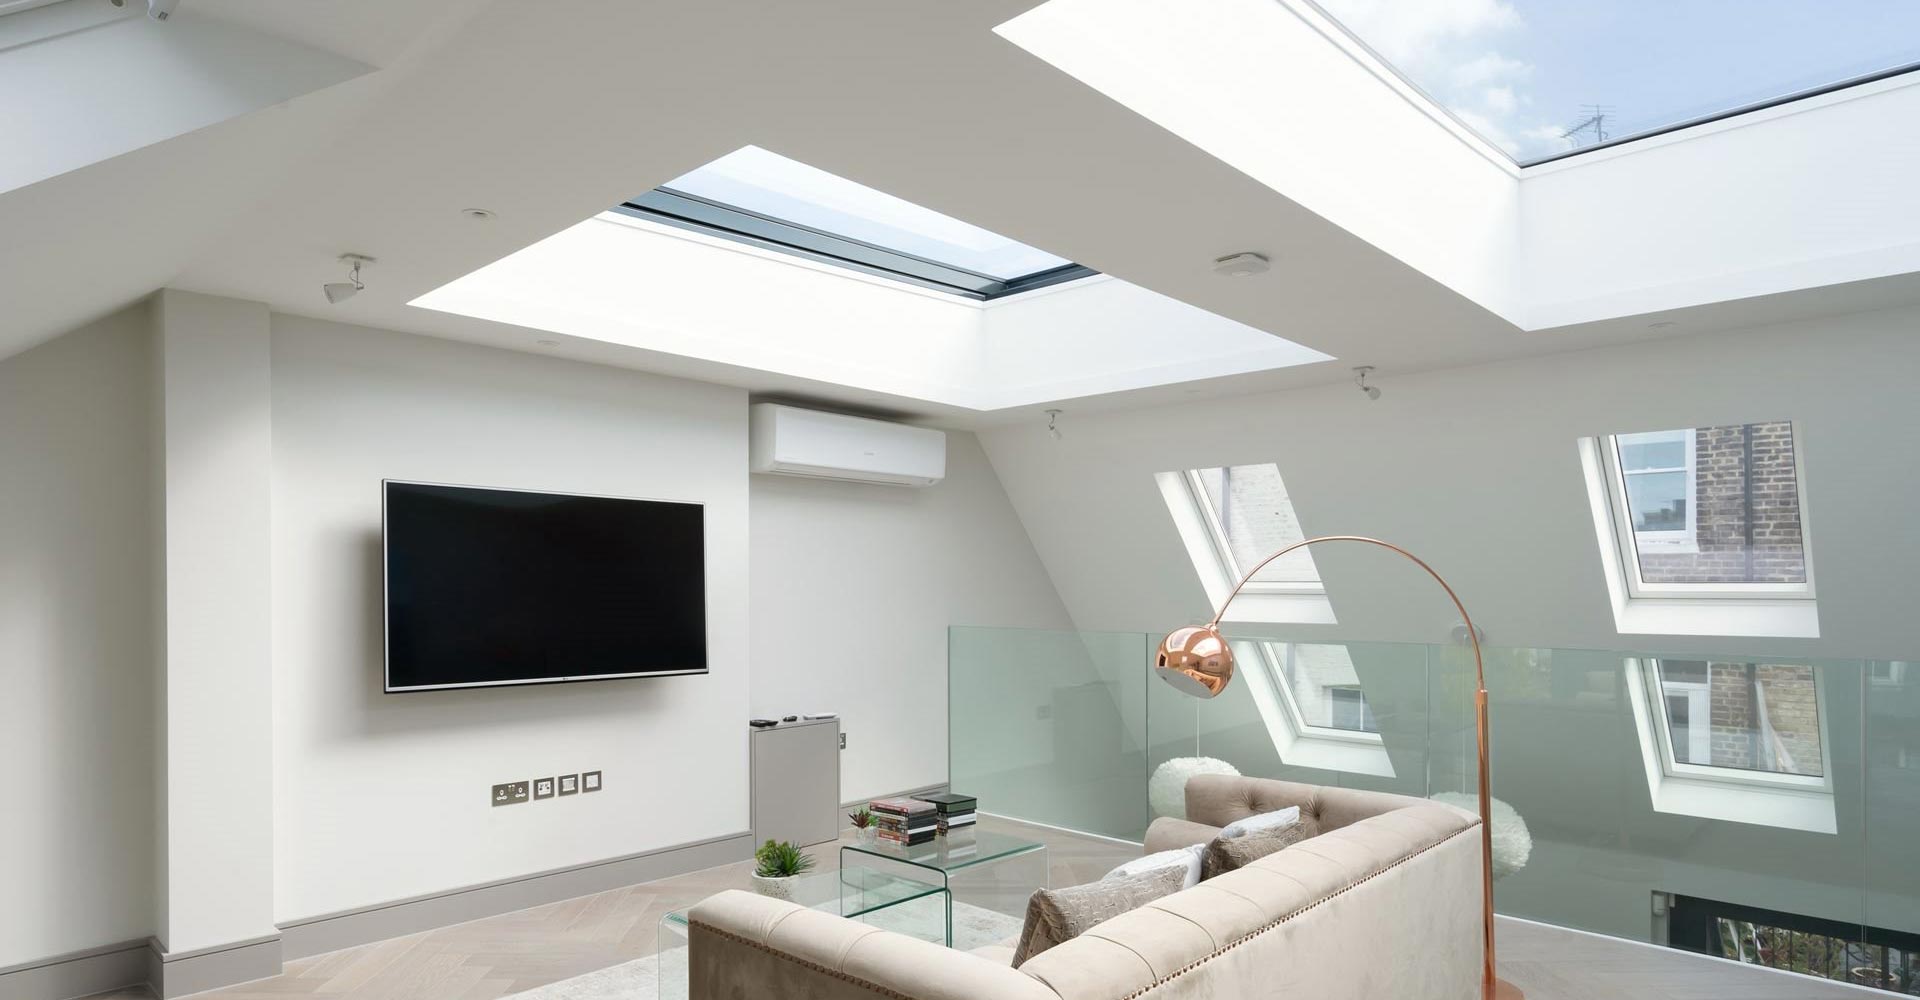 upstairs lounge area with suspended TV, wooden flooring, and skylight